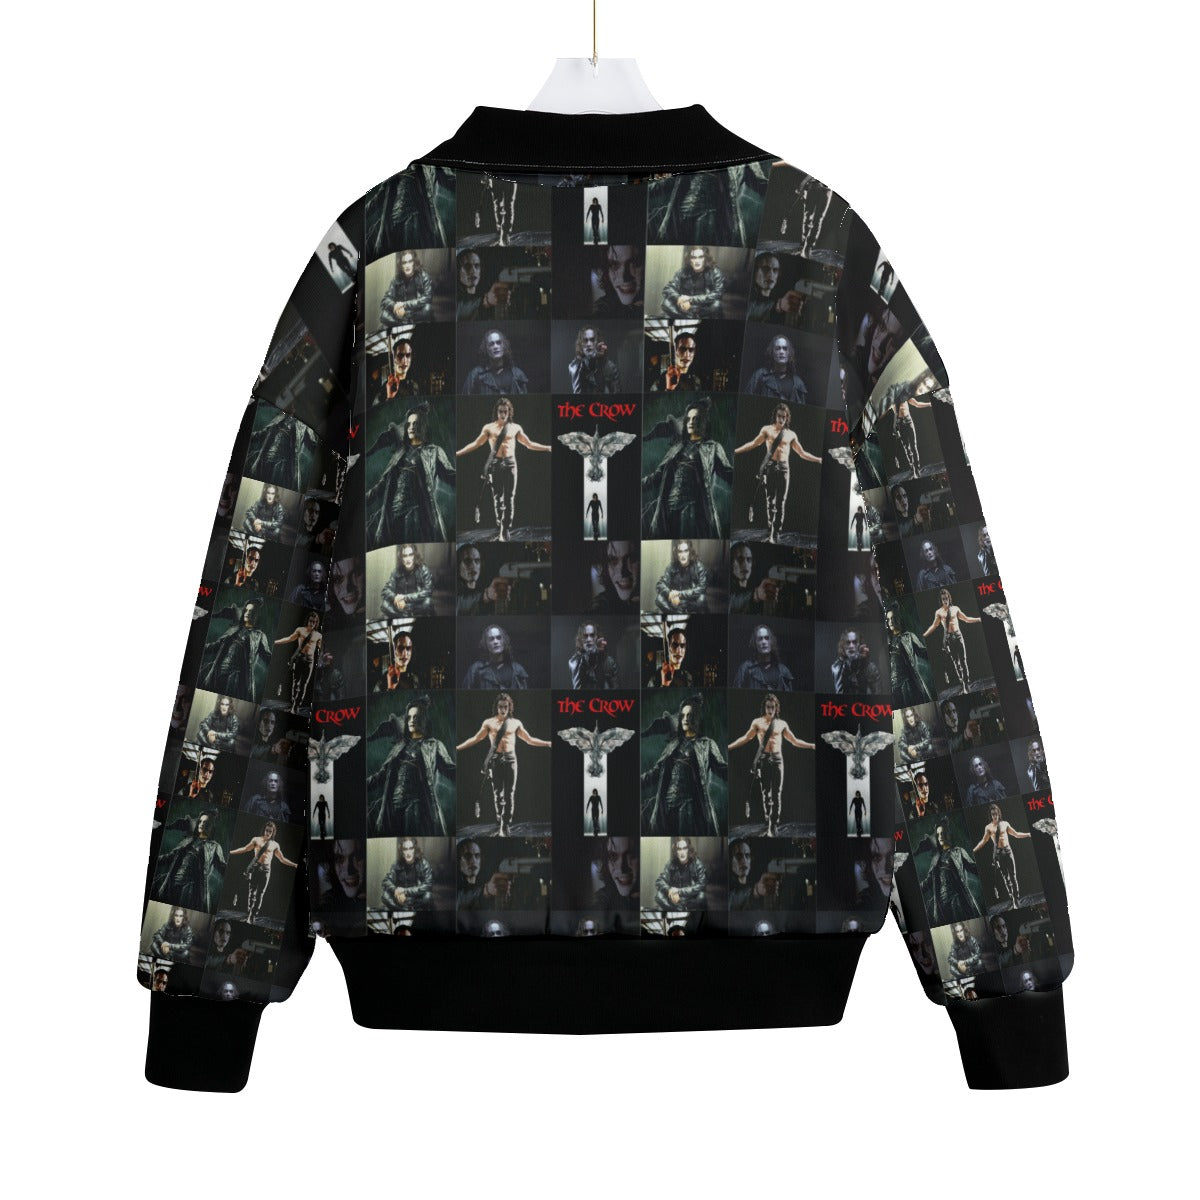 The Crow Knitted Fleece Bomber Jacket